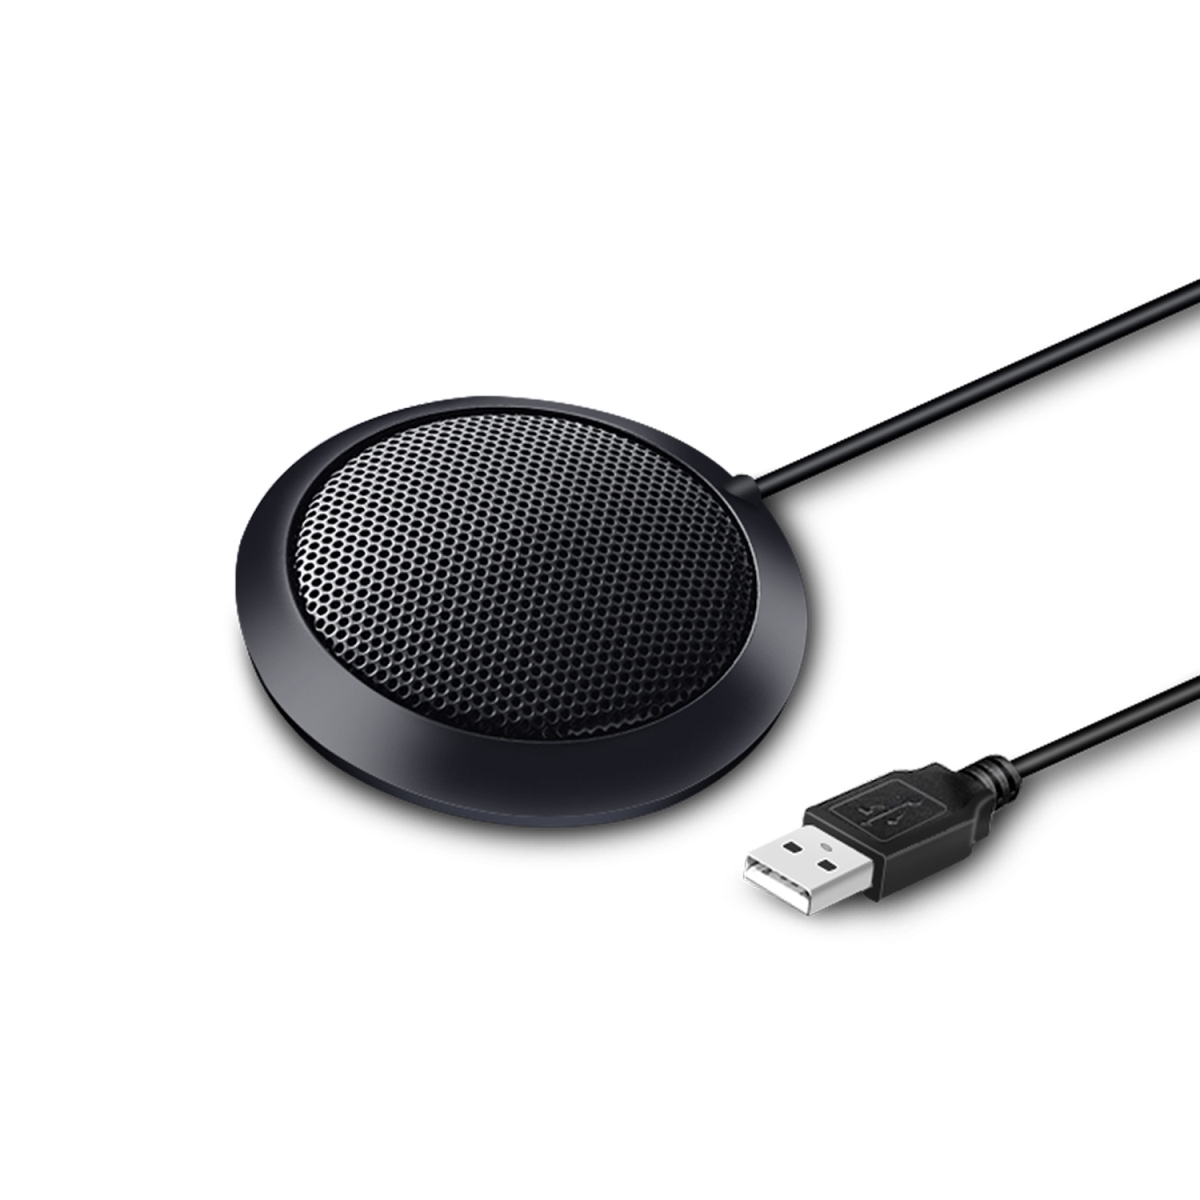 Picture of Adesso XTREAM M3 Omnidirectional USB Tabletop Microphone for Meetings & Video Conferences